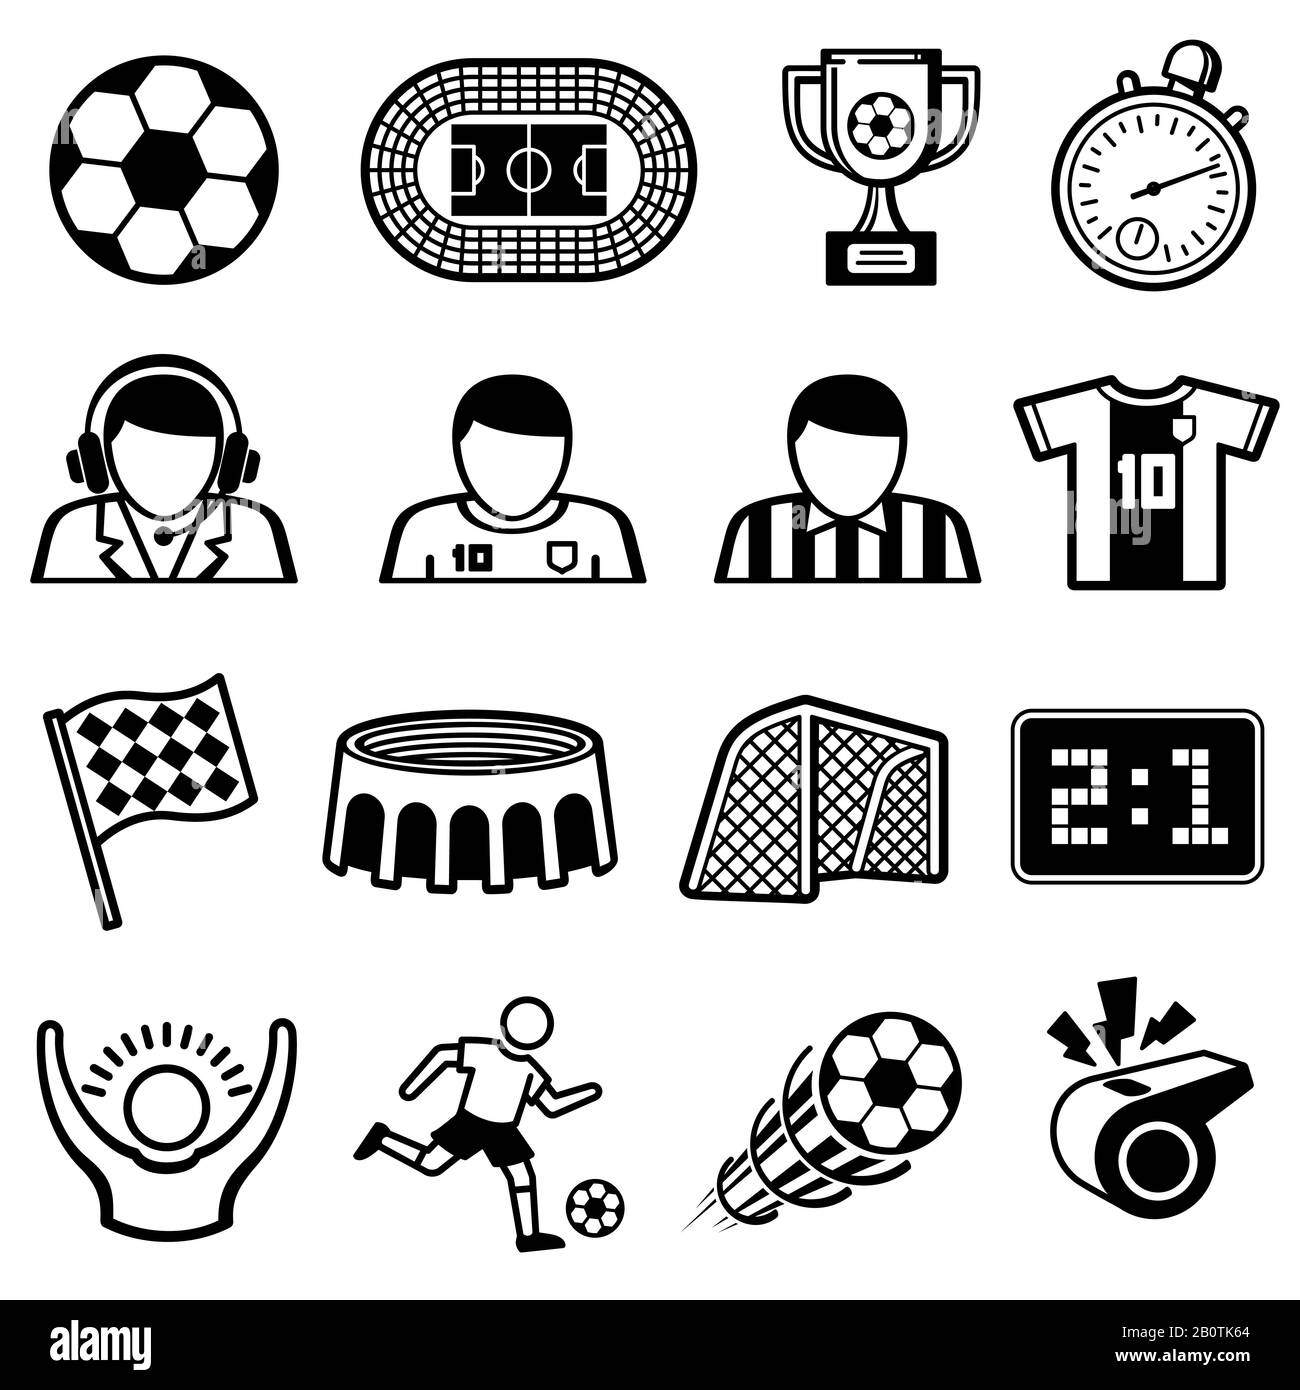 Football sports vector icons. Soccer team symbols. Game soccer and competition team illustration Stock Vector